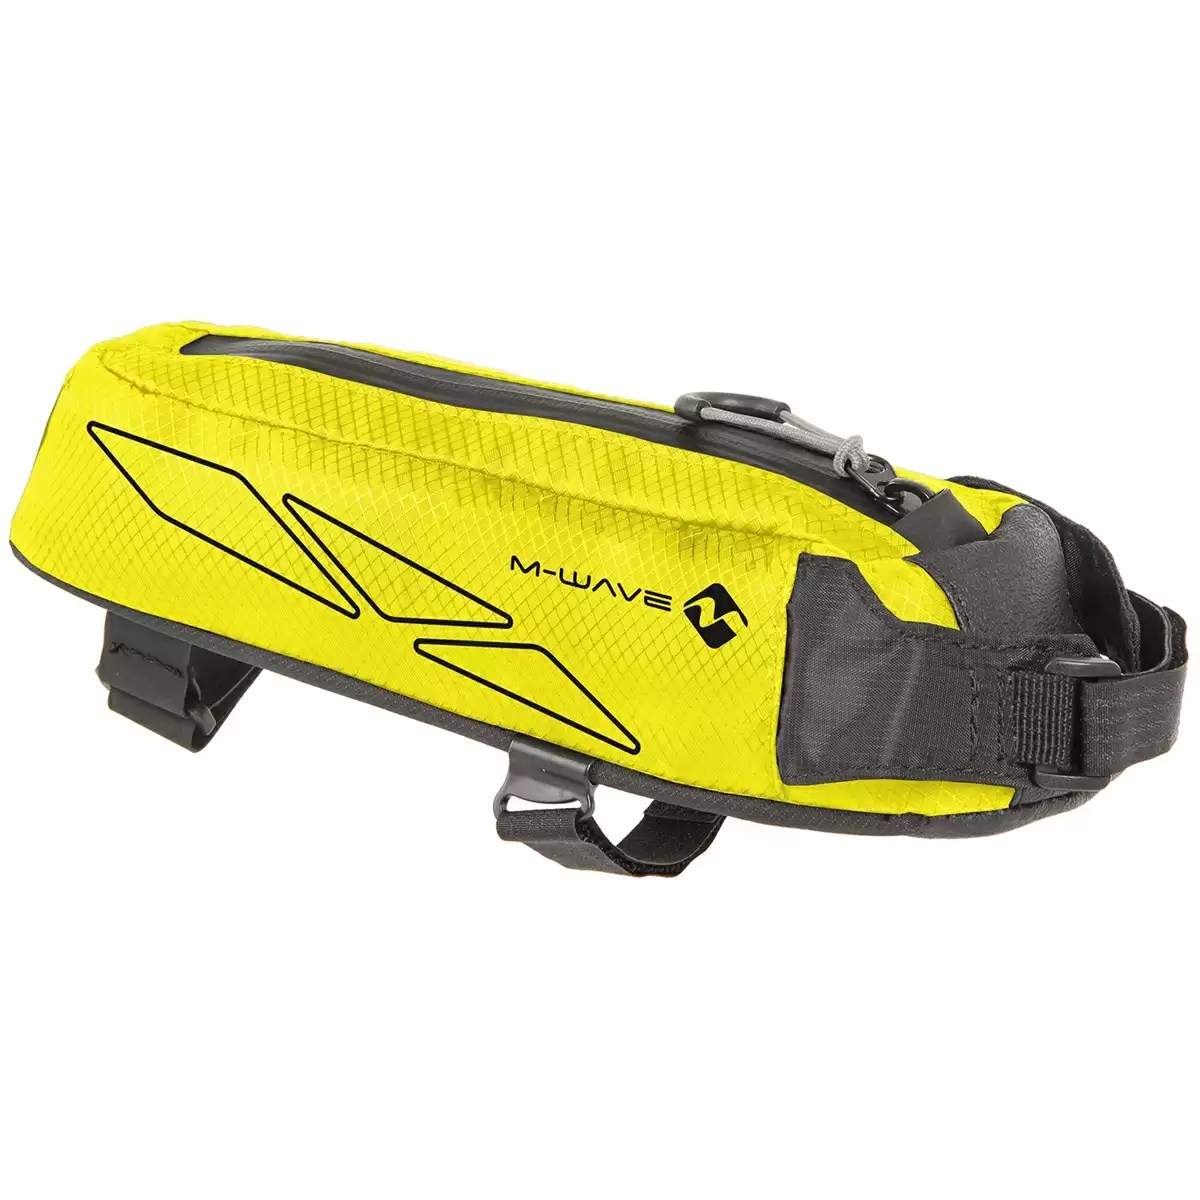 Front frame bag Rough Ride Top 0,7 liter yellow - image